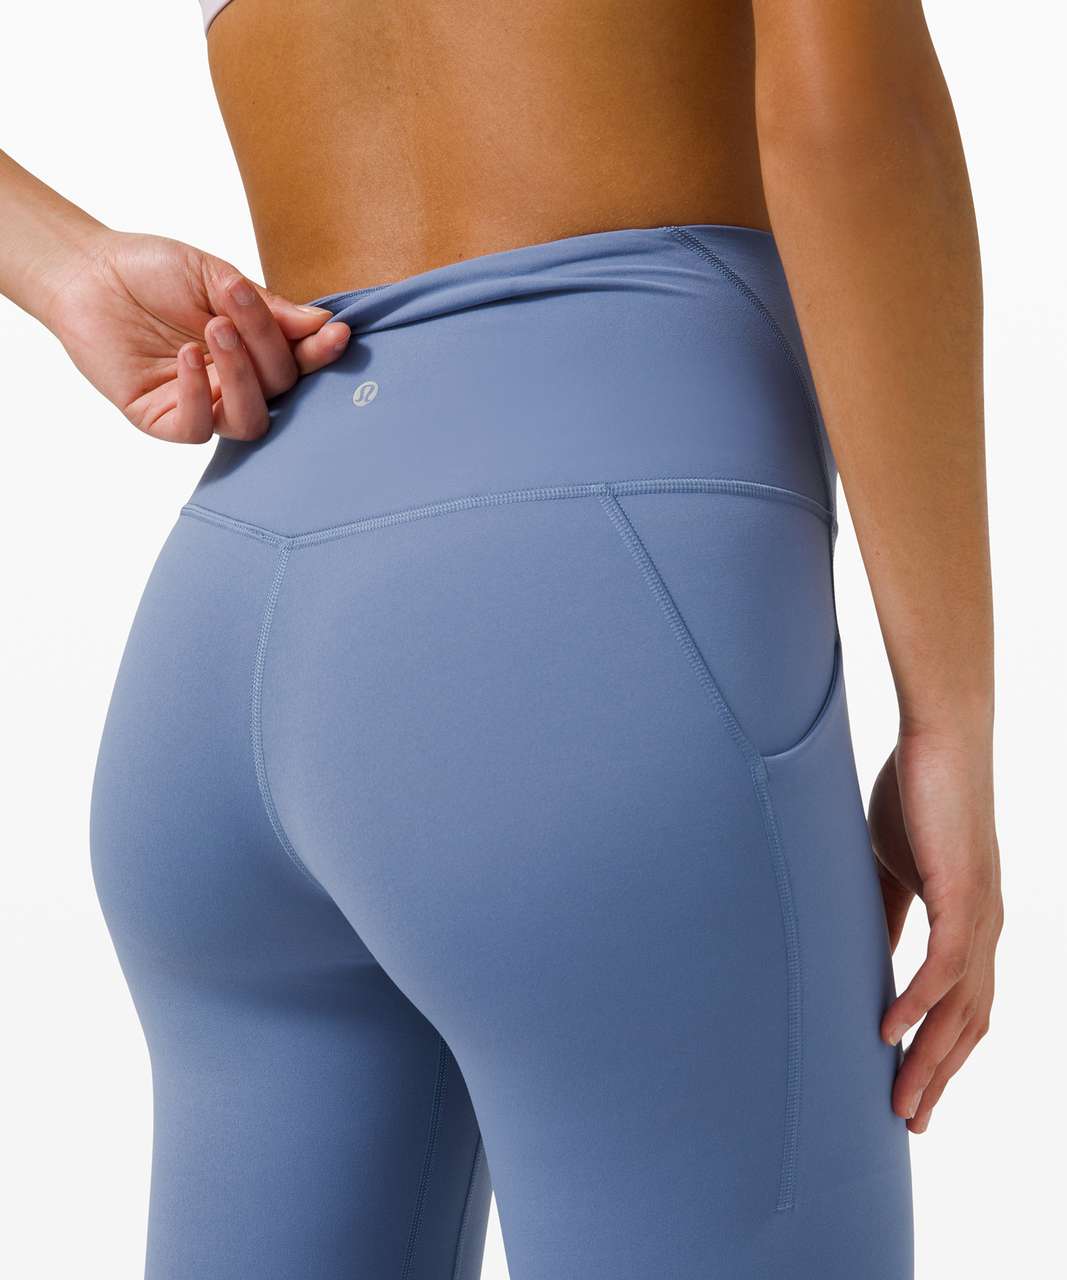 Help me decide! Unlimits or Align with Pockets to go with my new Back In  Action *Rulu in Heathered Water Drop? : r/lululemon